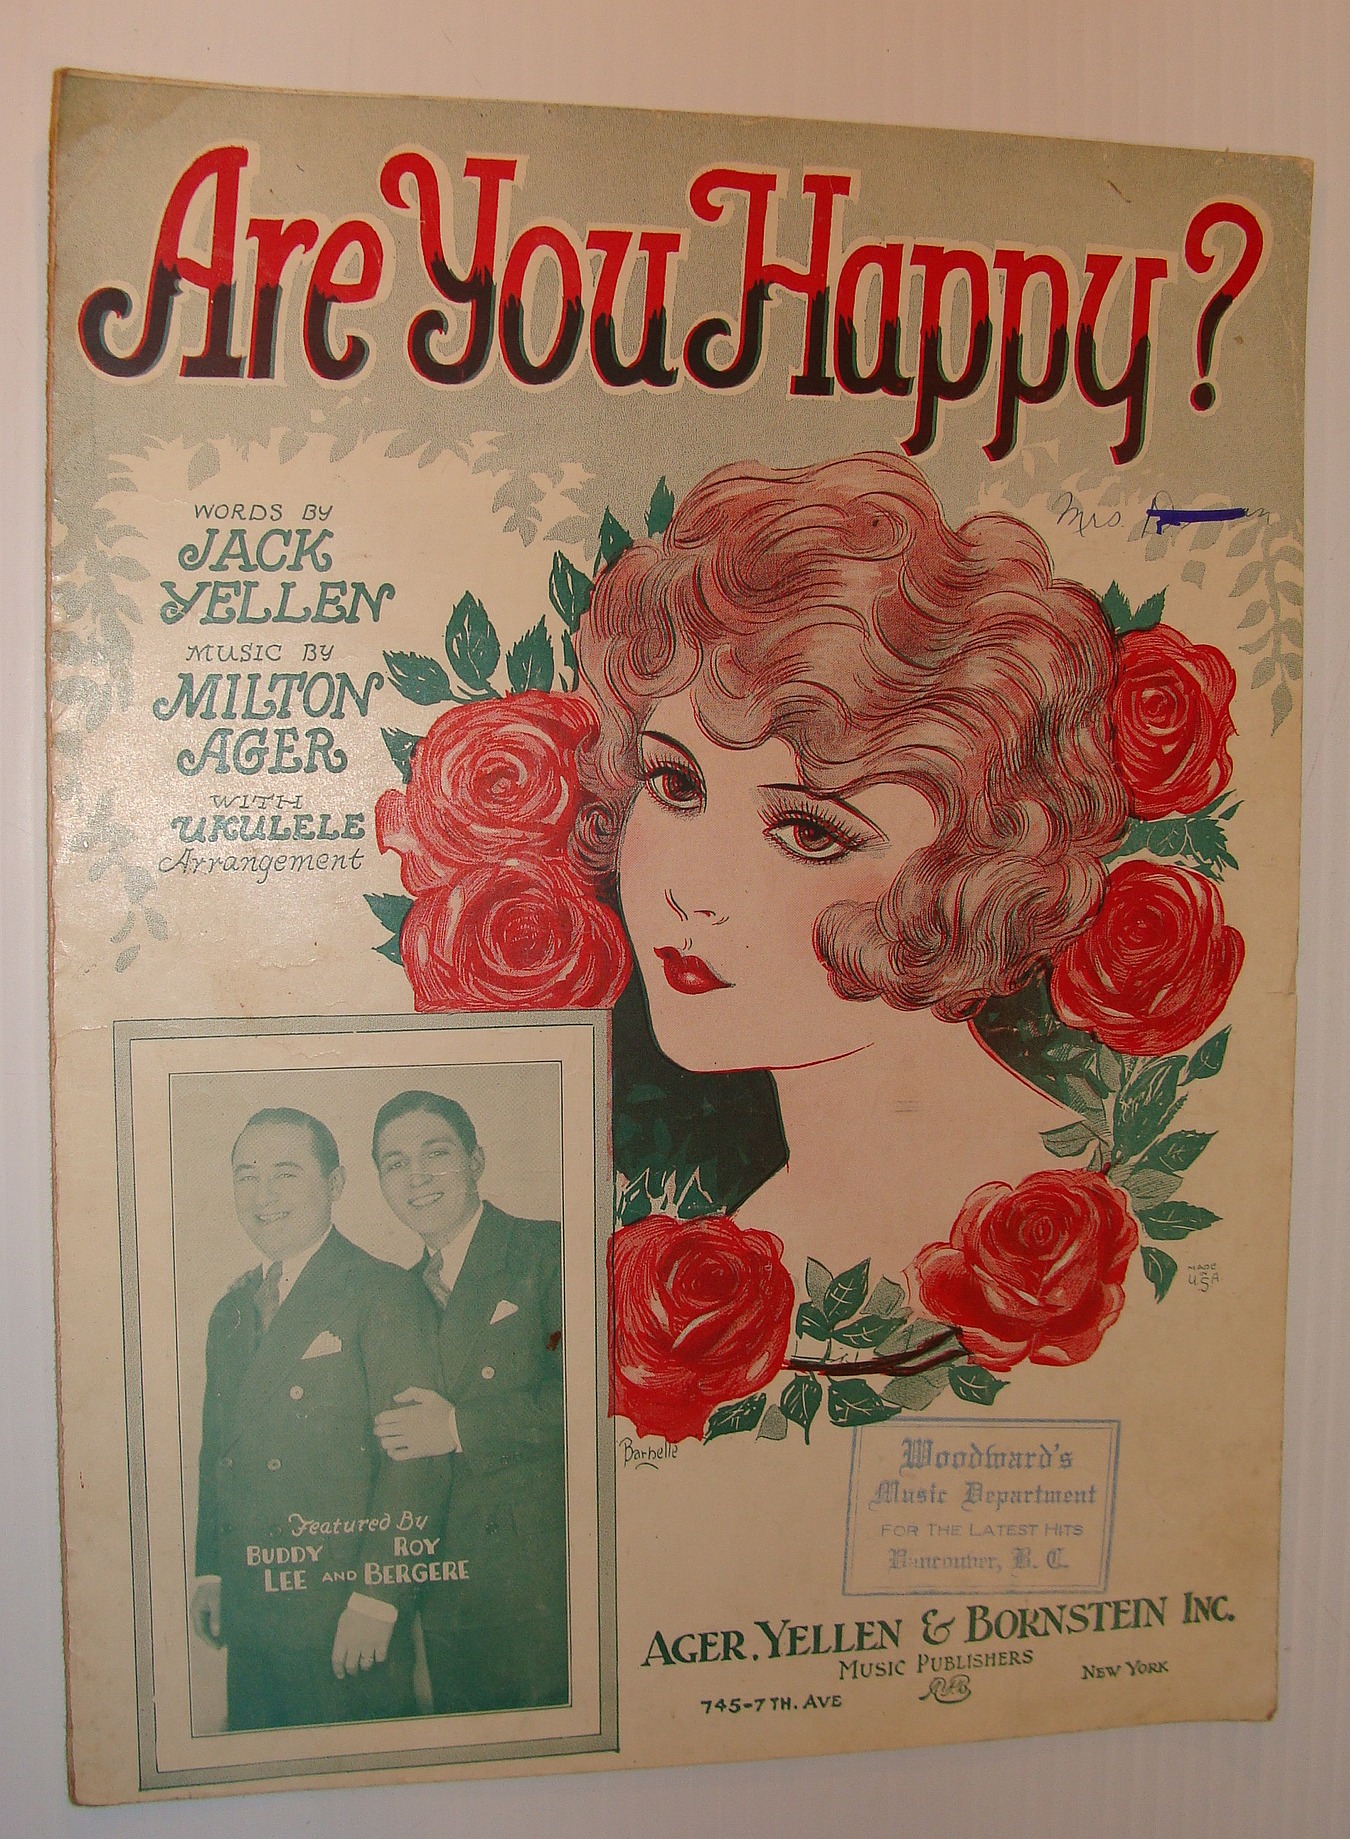 AGER, MILTON, YELLEN, JACK - Are You Happy? - Sheet Music with for Vocal and Piano Plus Ukulele Arrangement